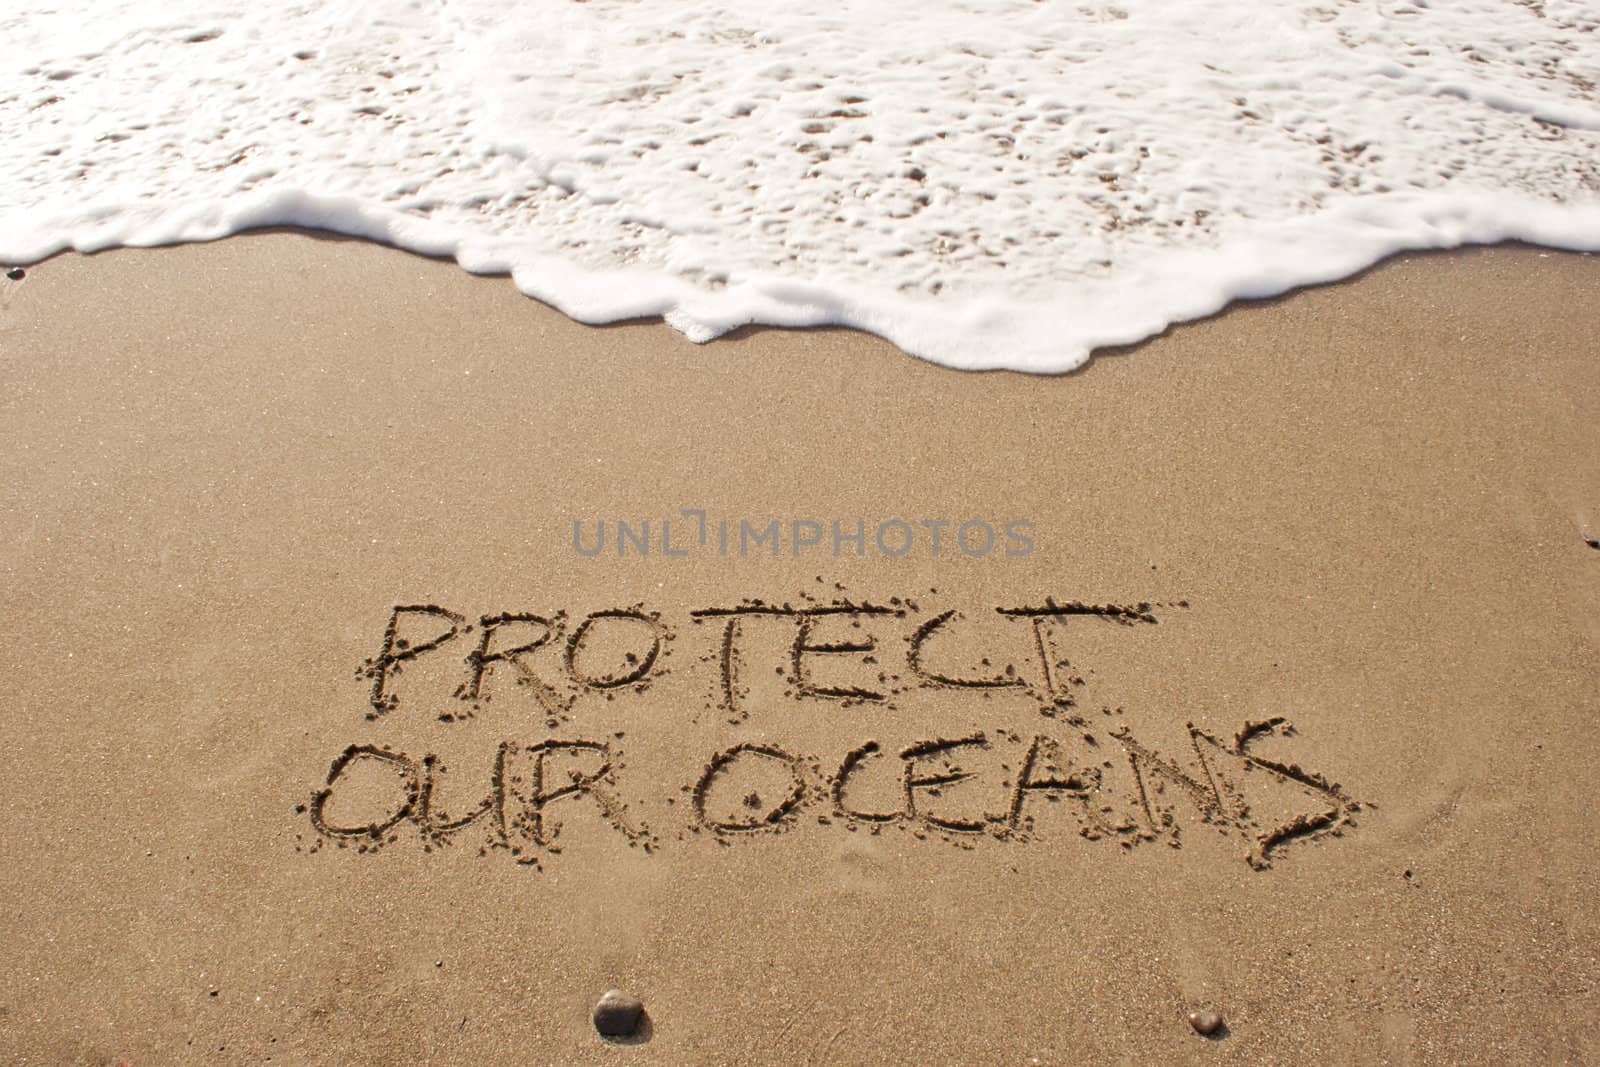 Protect our oceans written in the sand at Haumoana Beach, Hawke's Bay, New Zealand